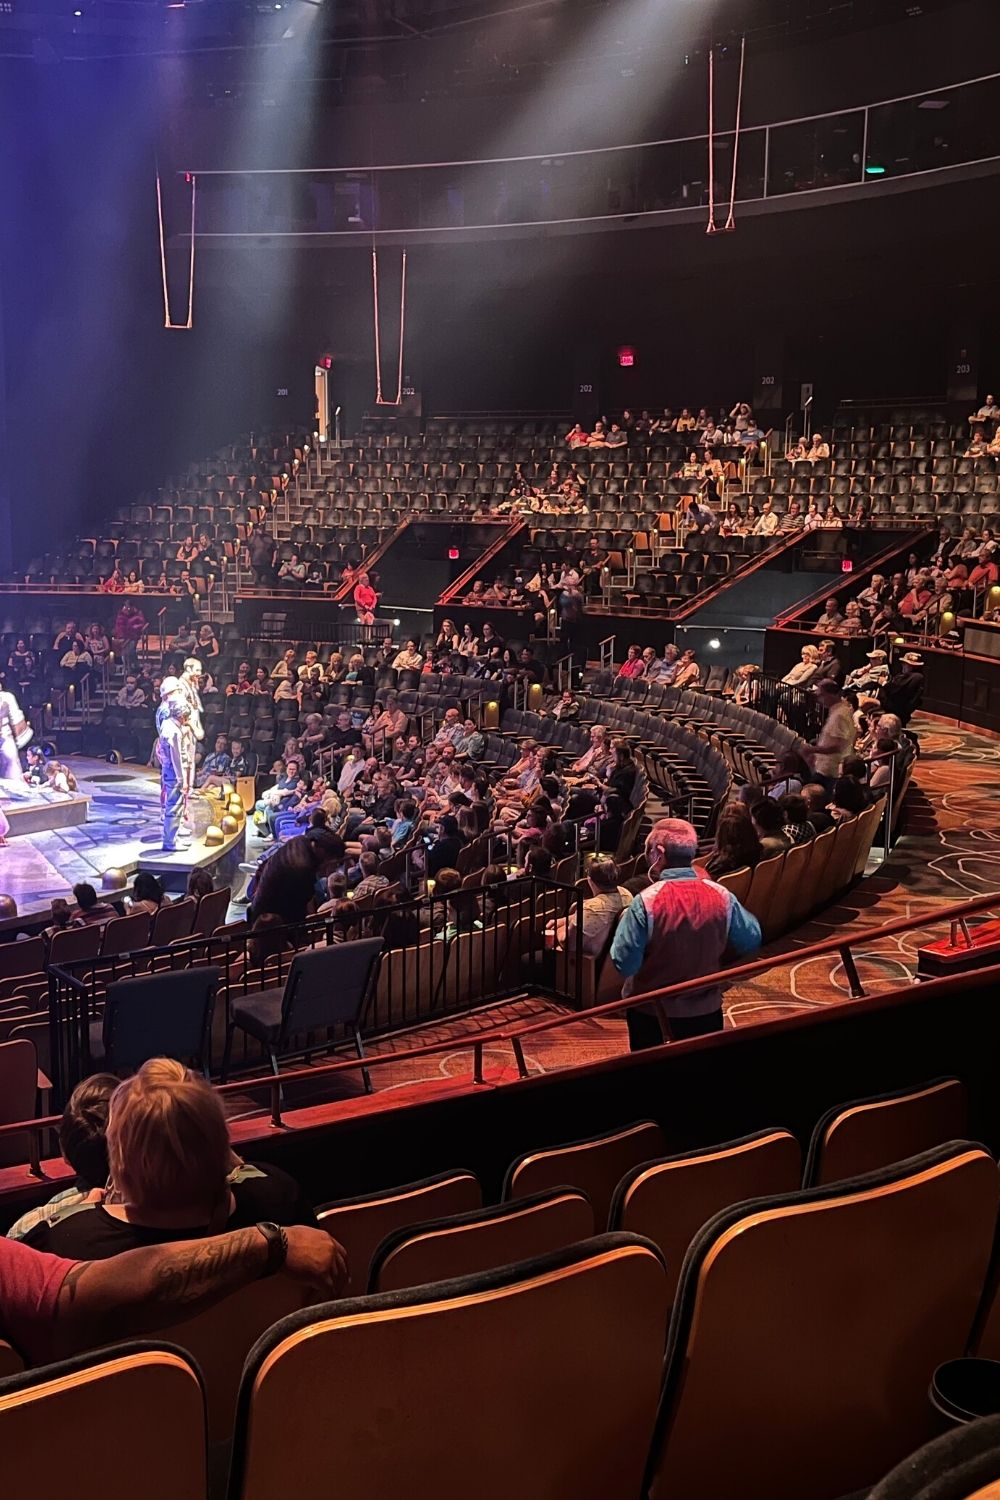 inside the Cirque du Soleil theater at Disney Springs